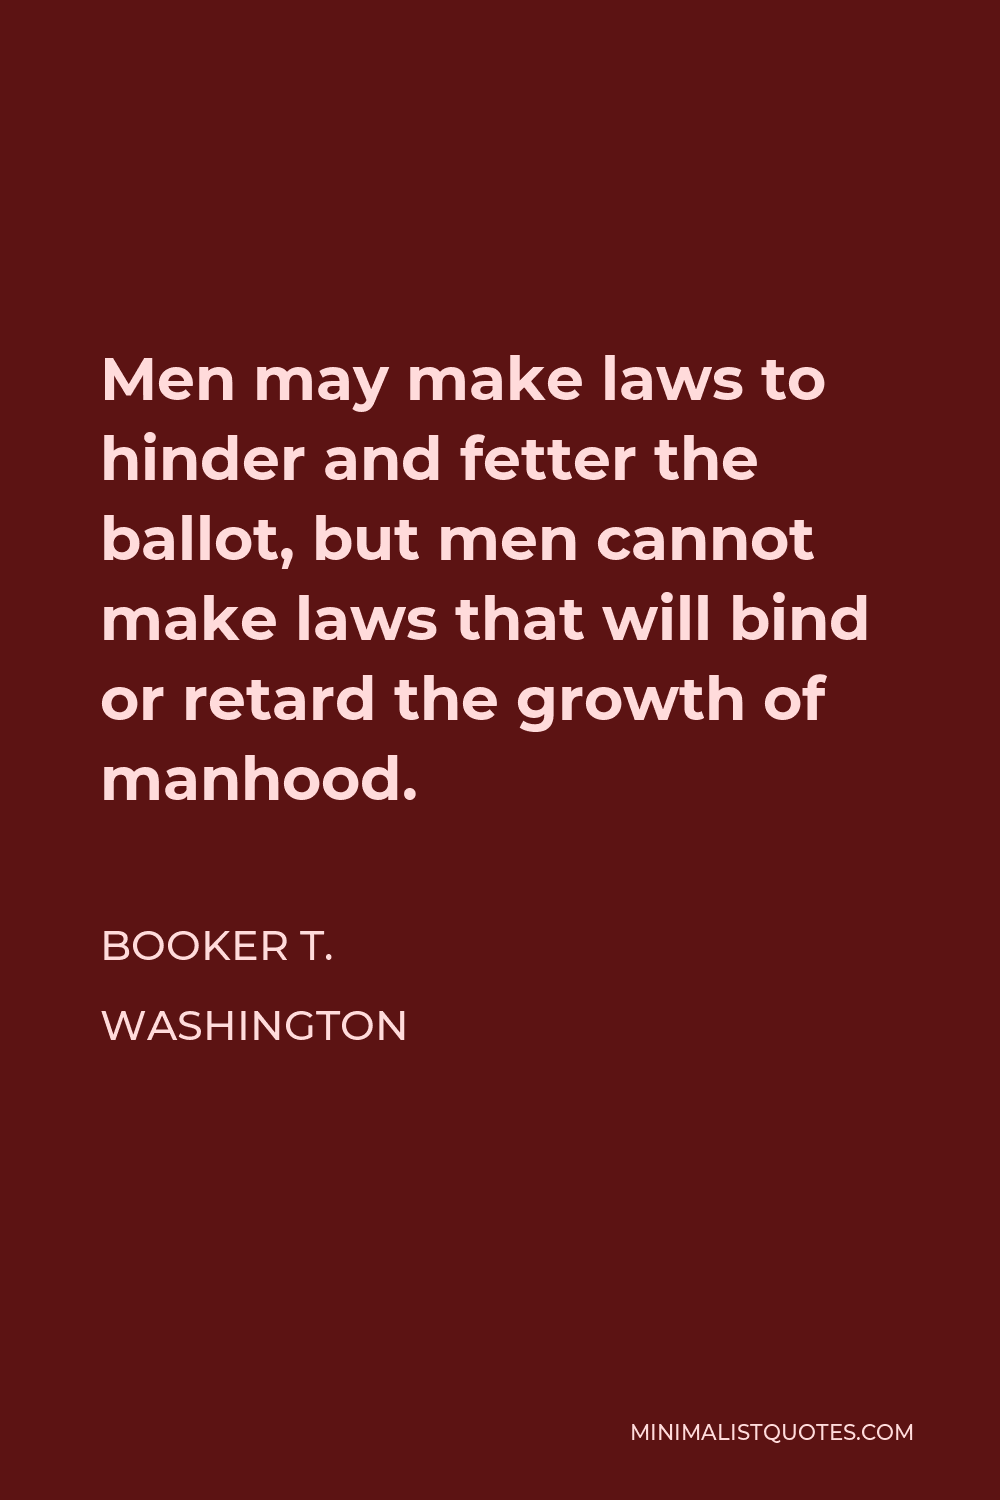 Booker T. Washington Quote - Men may make laws to hinder and fetter the ballot, but men cannot make laws that will bind or retard the growth of manhood.